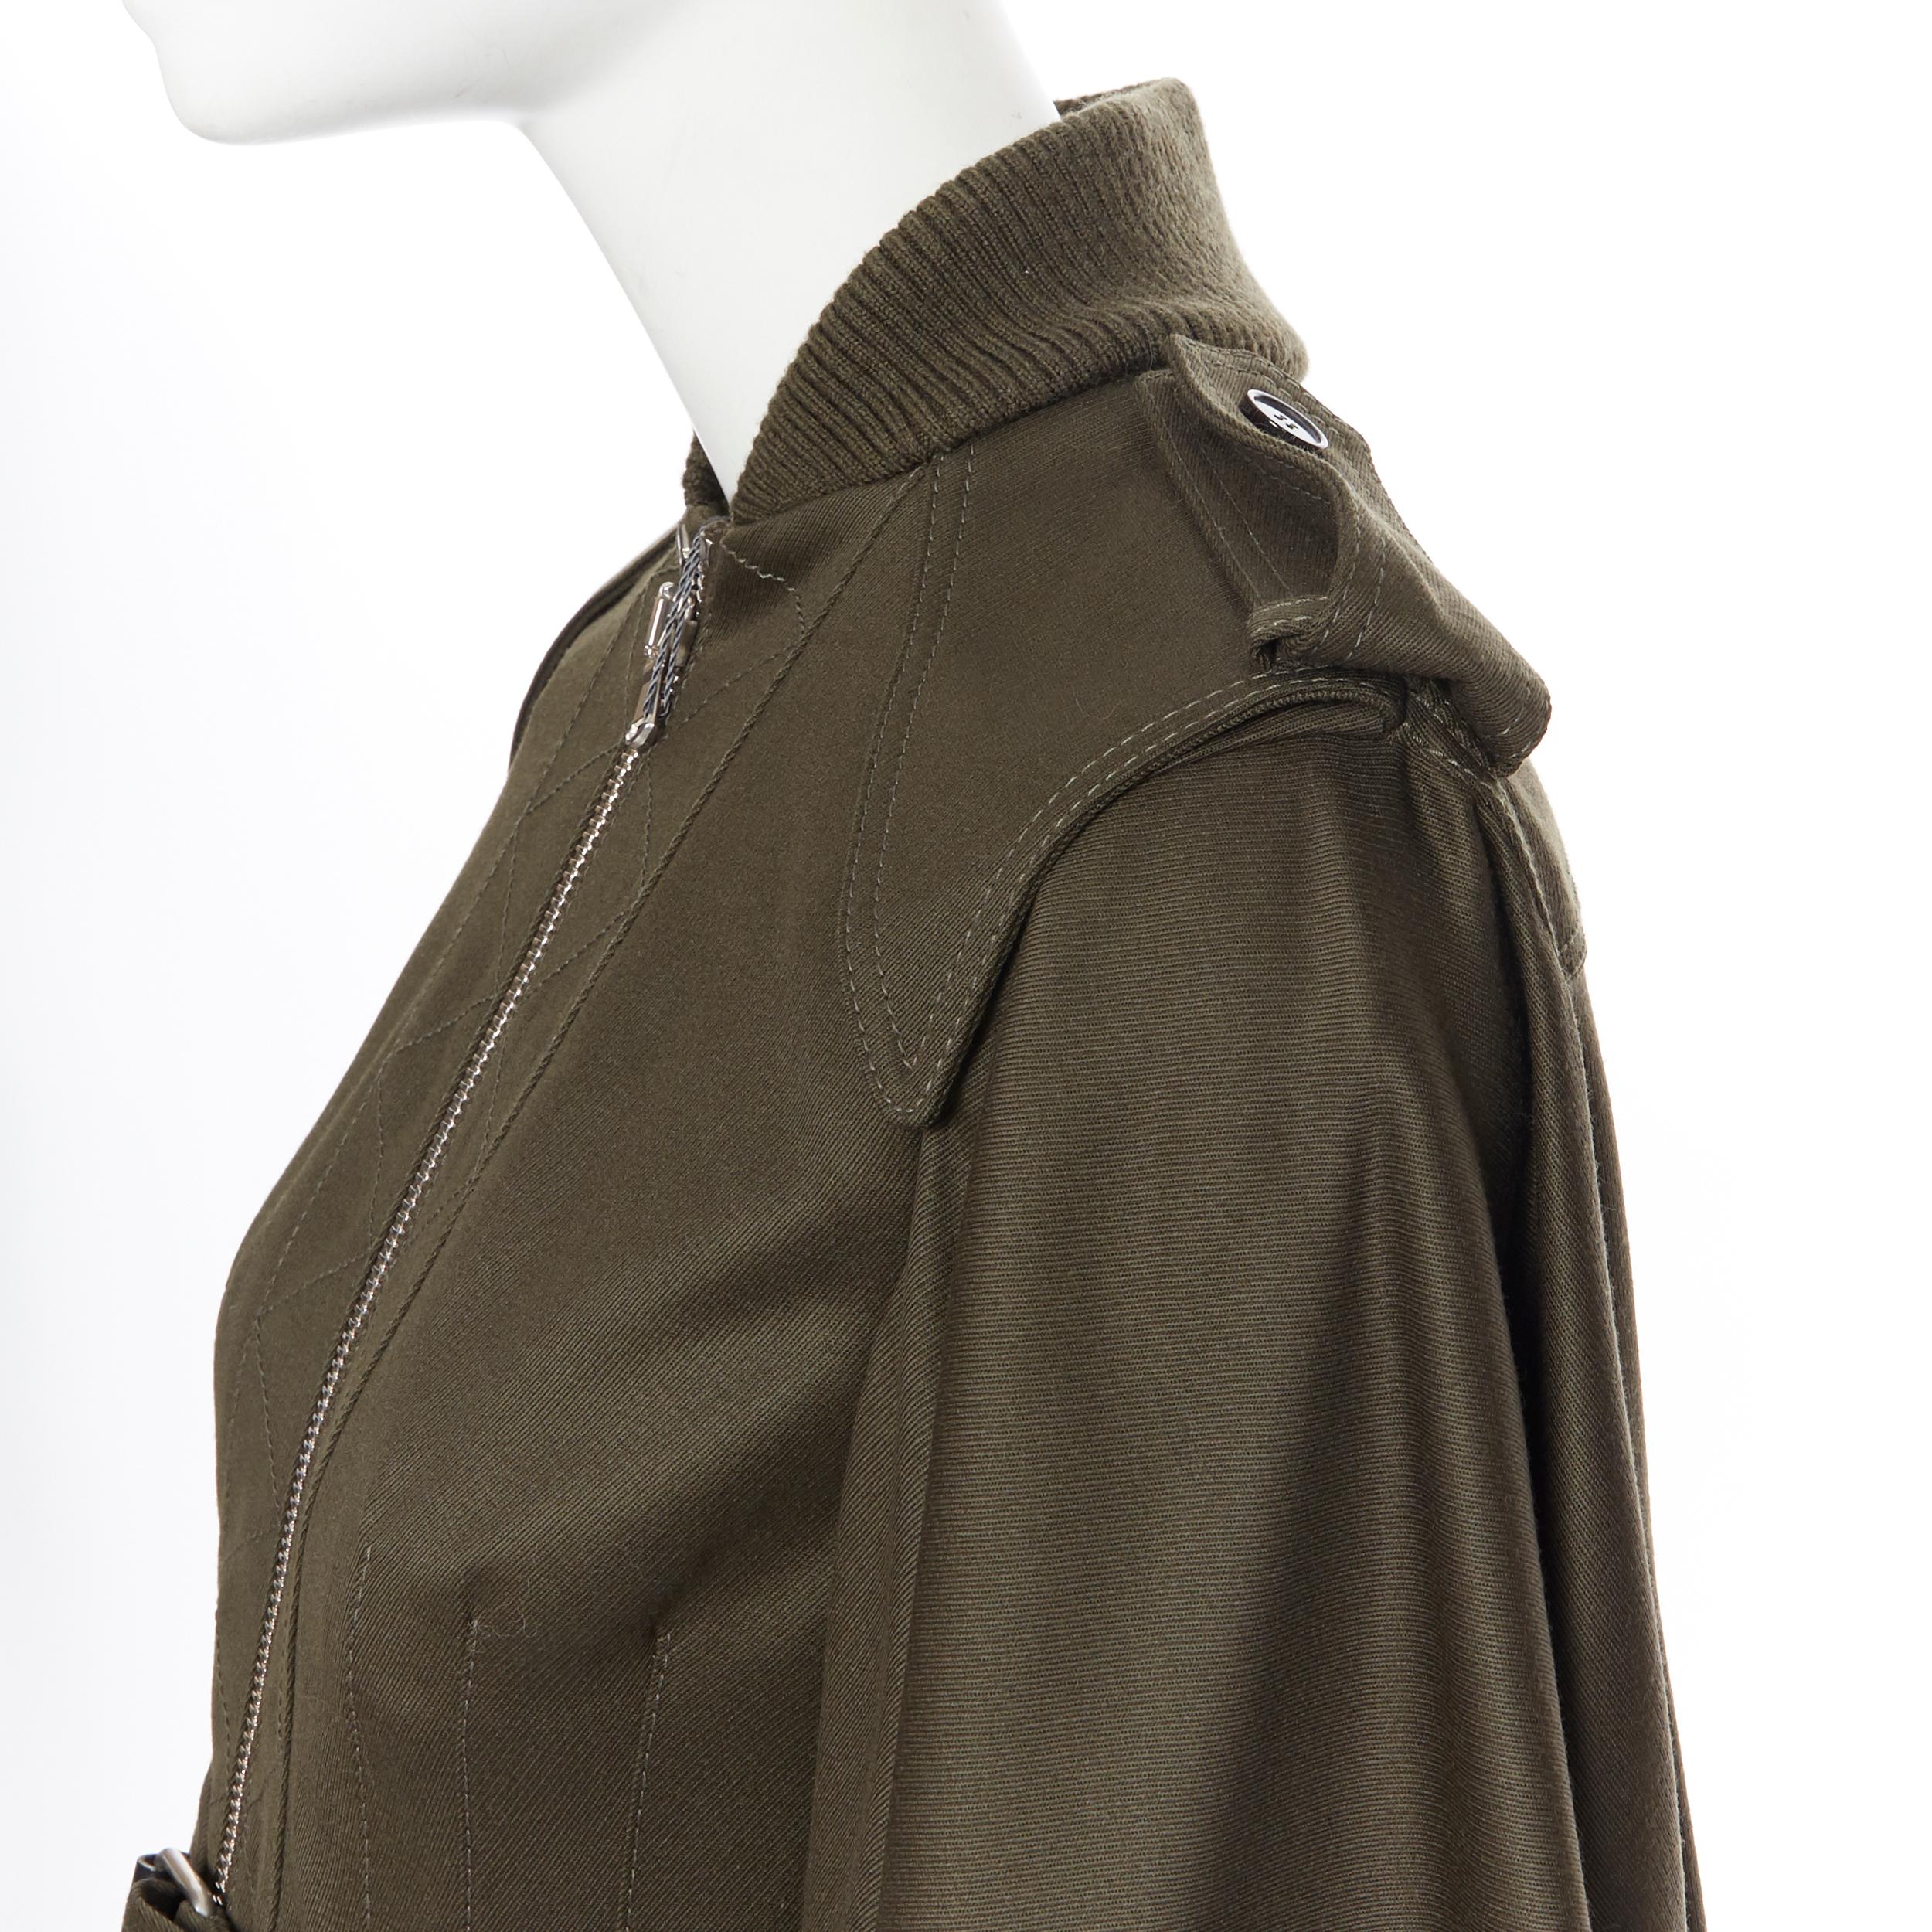 new ALEXANDER MCQUEEN 2015 khaki green belted military cape jacket IT36 XS 1